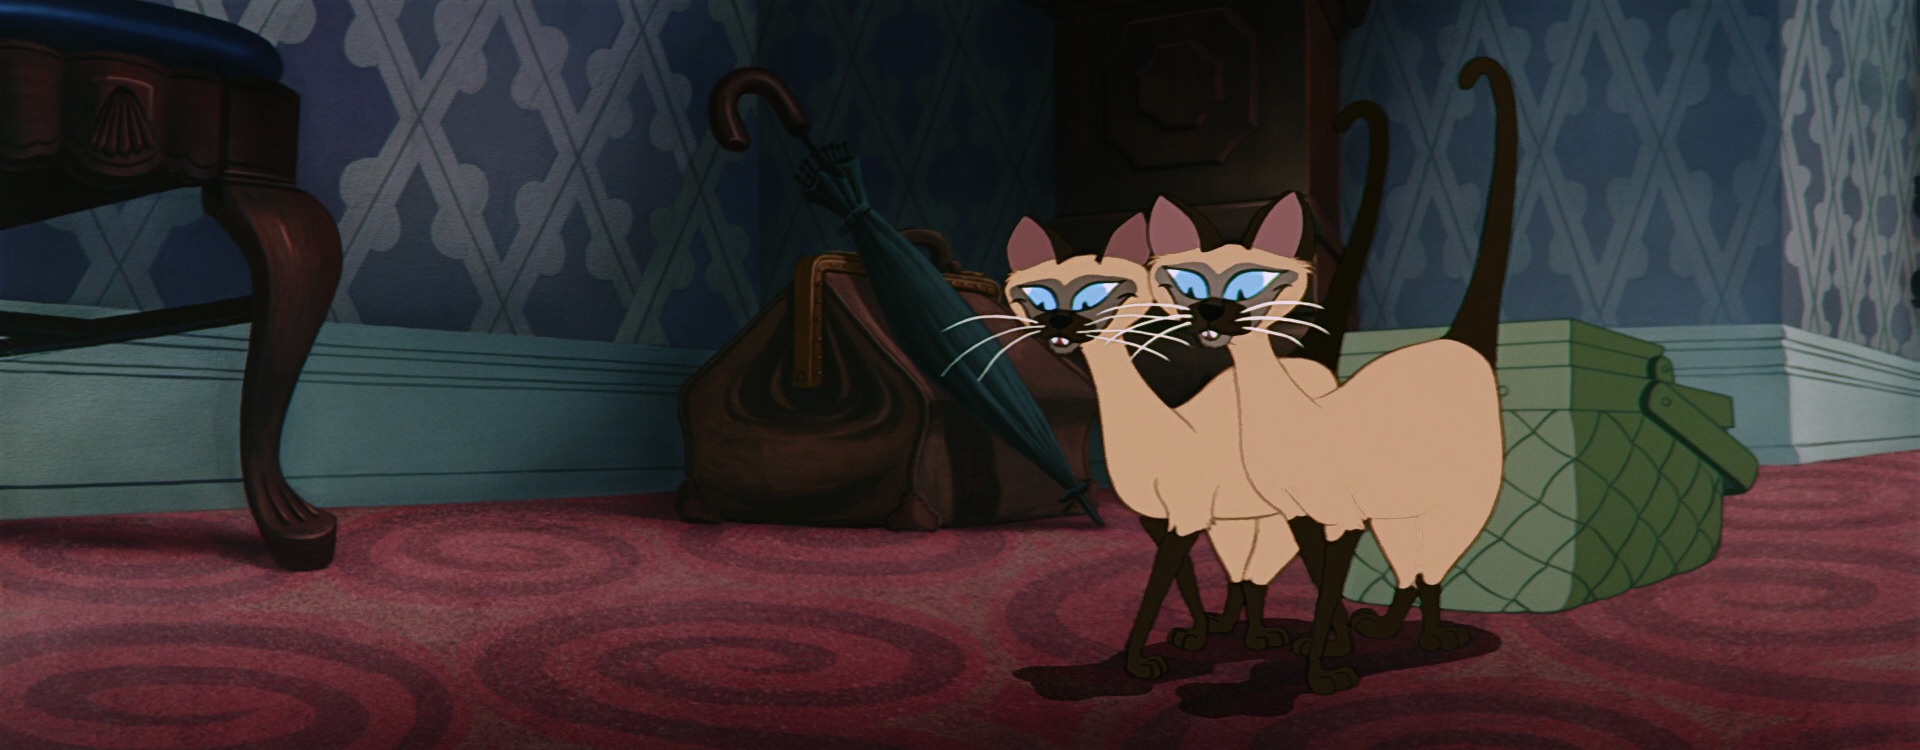 What are the Siamese cats called in Lady and the Tramp?